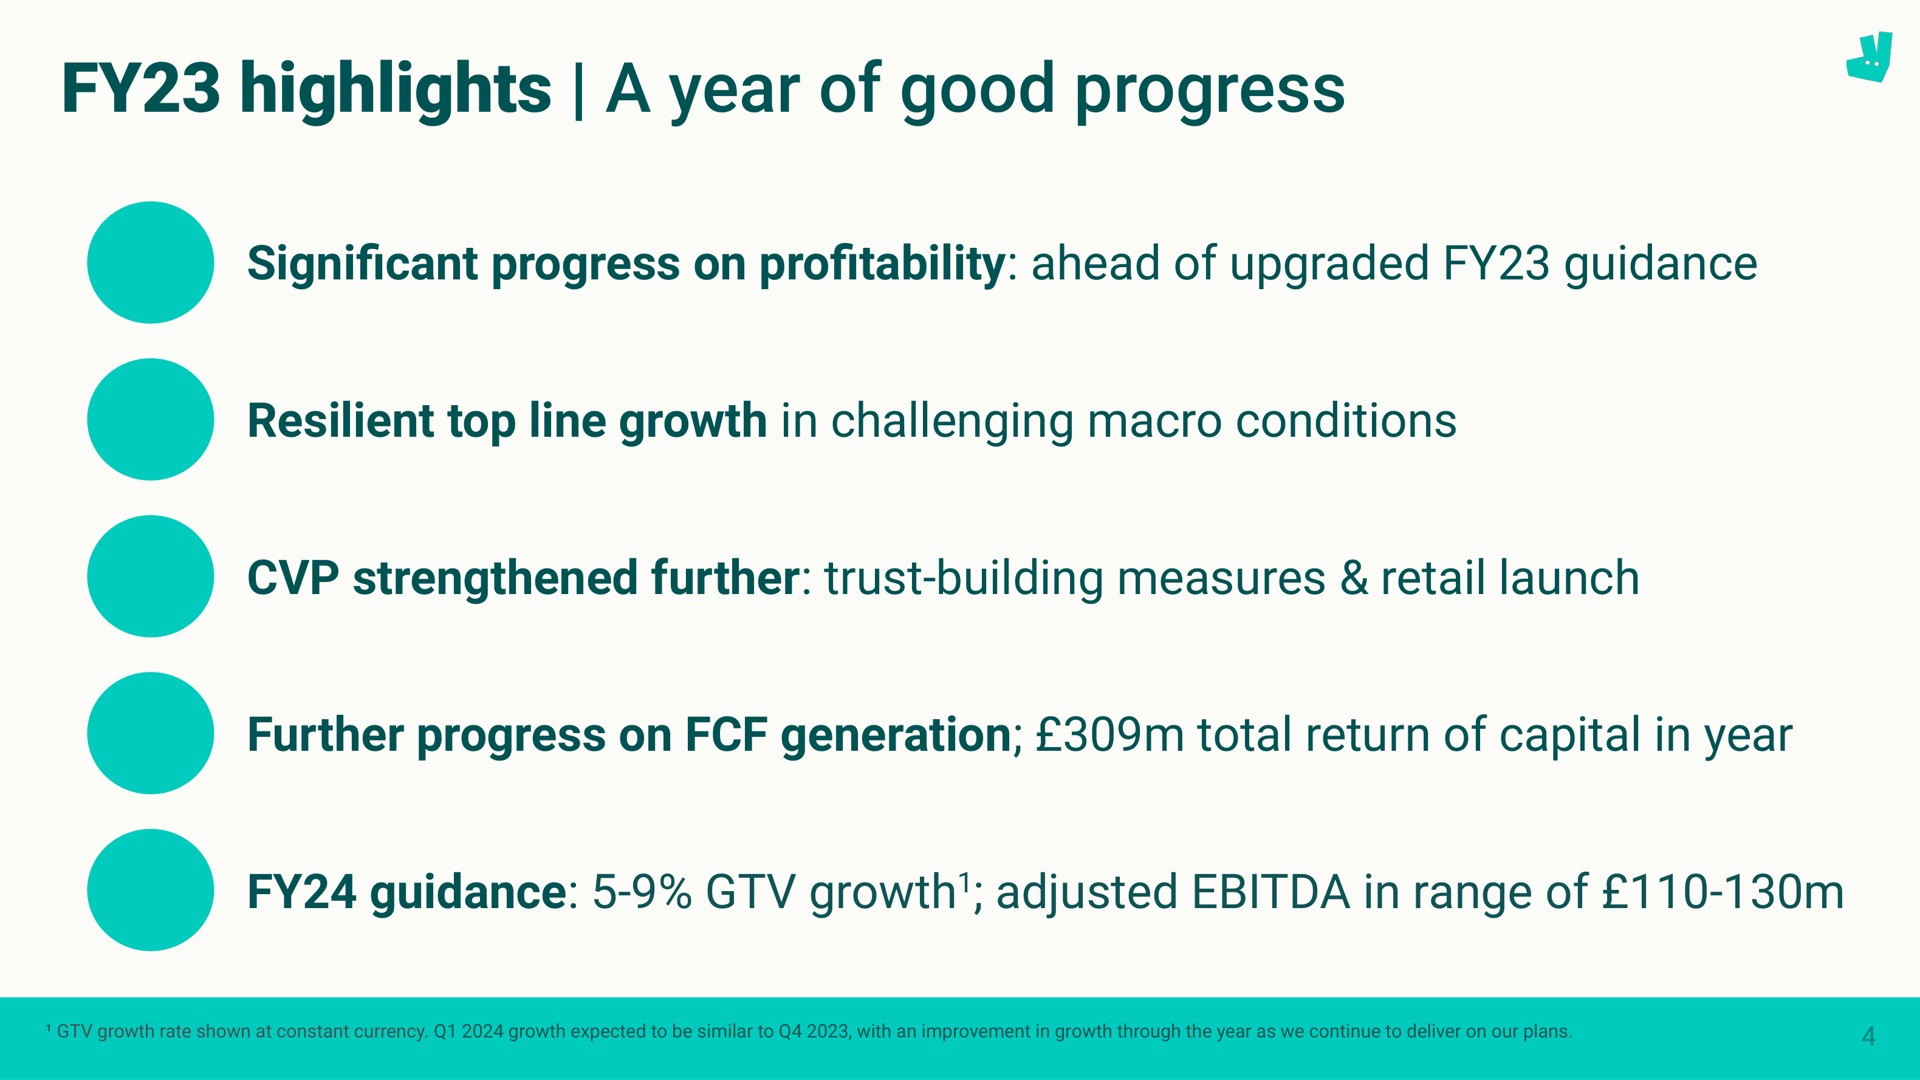 highlights a year of good progress | Deliveroo